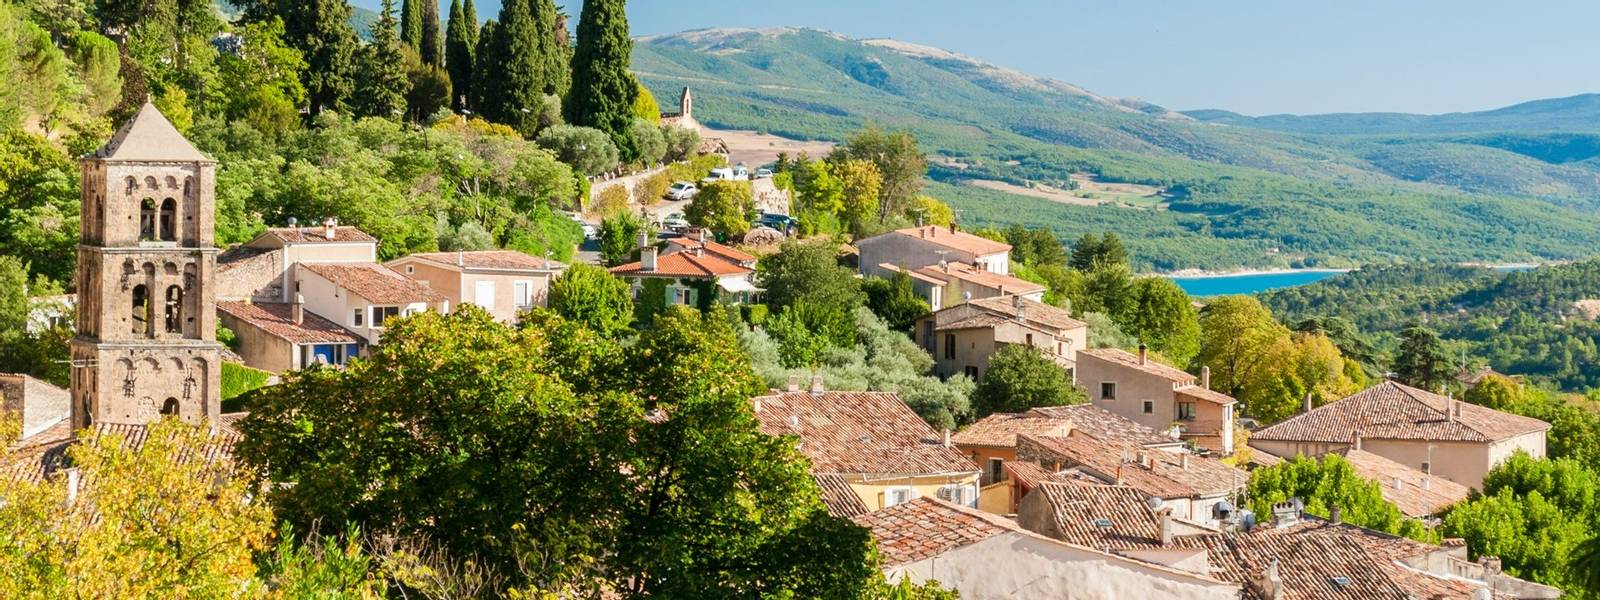 The village of Moustiers-Sainte-Marie in Provence (France)